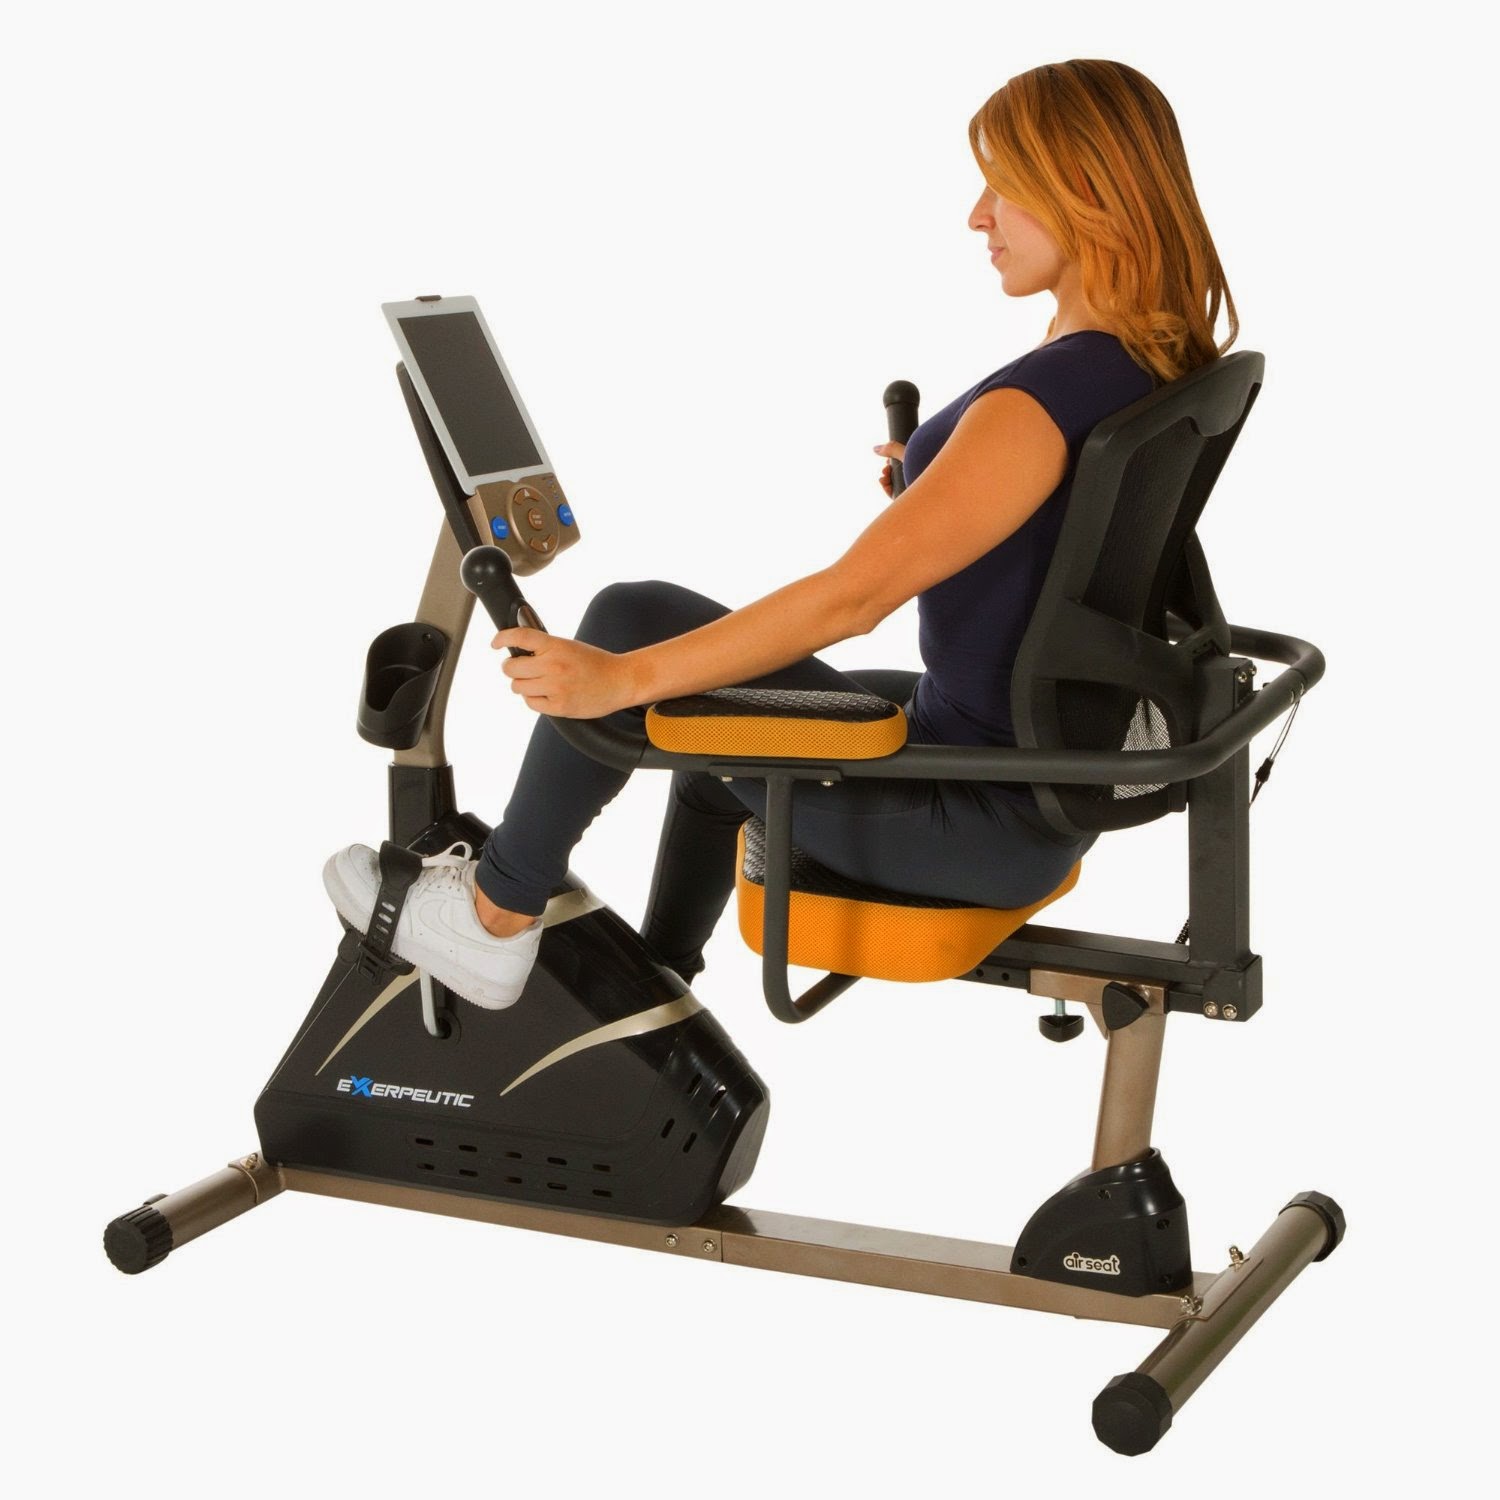 Exerpeutic 4000 Recumbent Bike with Bluetooth Technology & Mobile App Tracking, review plus compare with Exerpeutic 2000